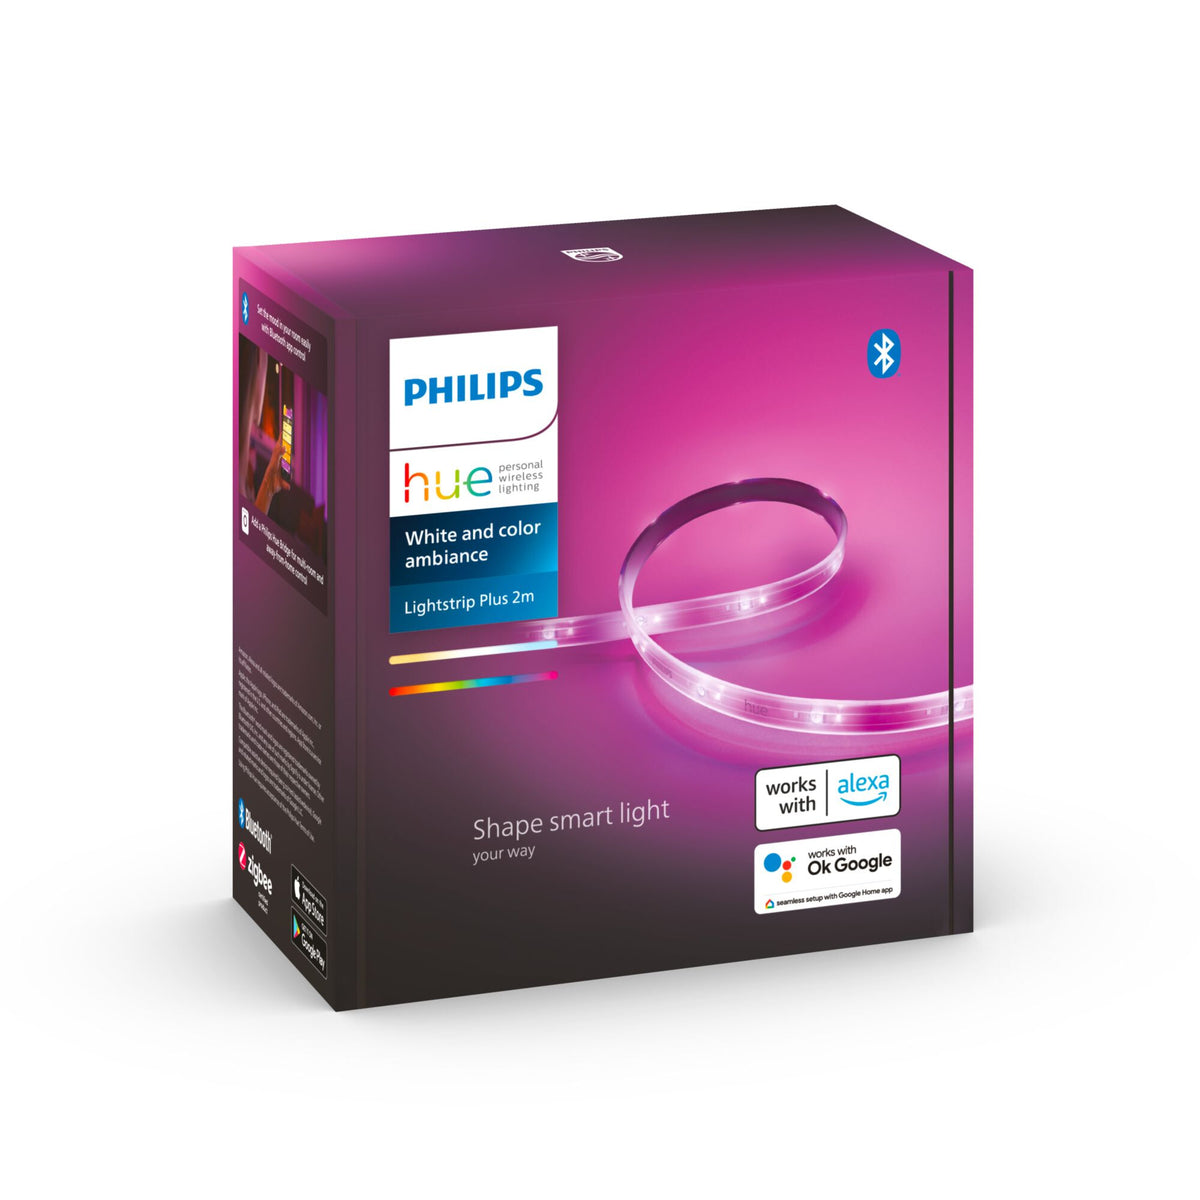 Philips Hue Lightstrip Plus base V4 (2 Metre) - White and colour ambience